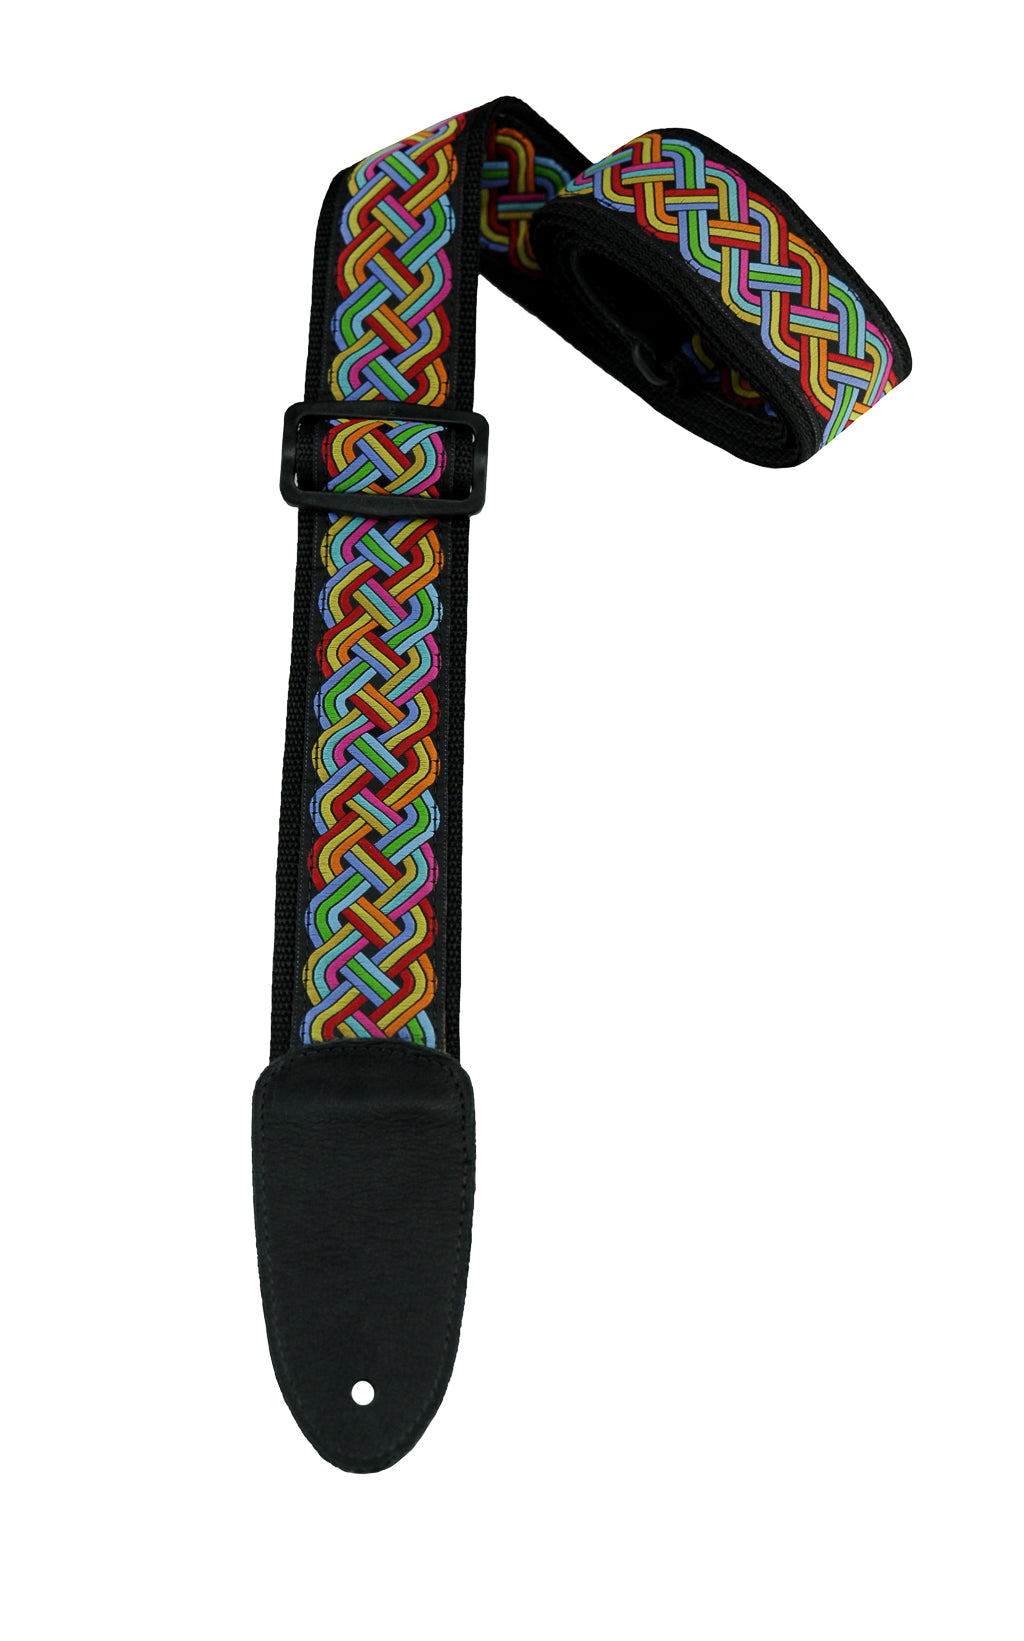 Henry Heller 2" Deluxe Jacquard Strap with Tri Glide Nylon Backing - Multi-Color